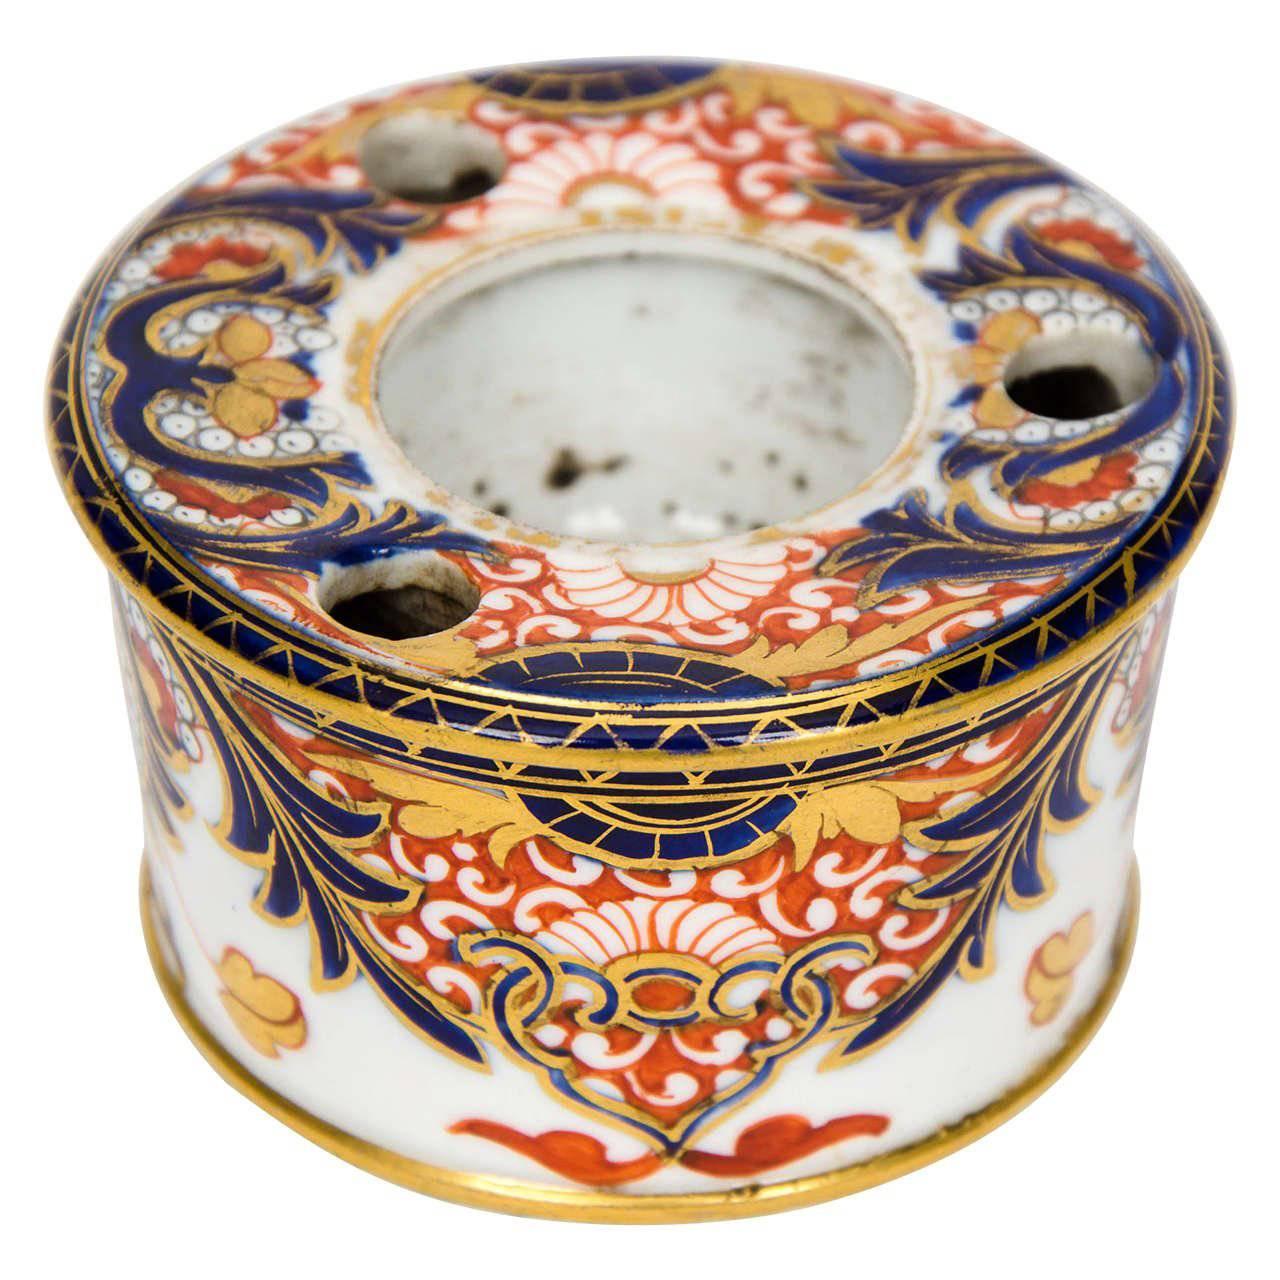 Early porcelain derby ink wells are rare.

This inkwell is beautifully hand-decorated in one of the derby's bold Imari patterns called the; Old Japan or Kings pattern. The item is richly hand gilded. 

The piece carry's the early, hand-painted, red